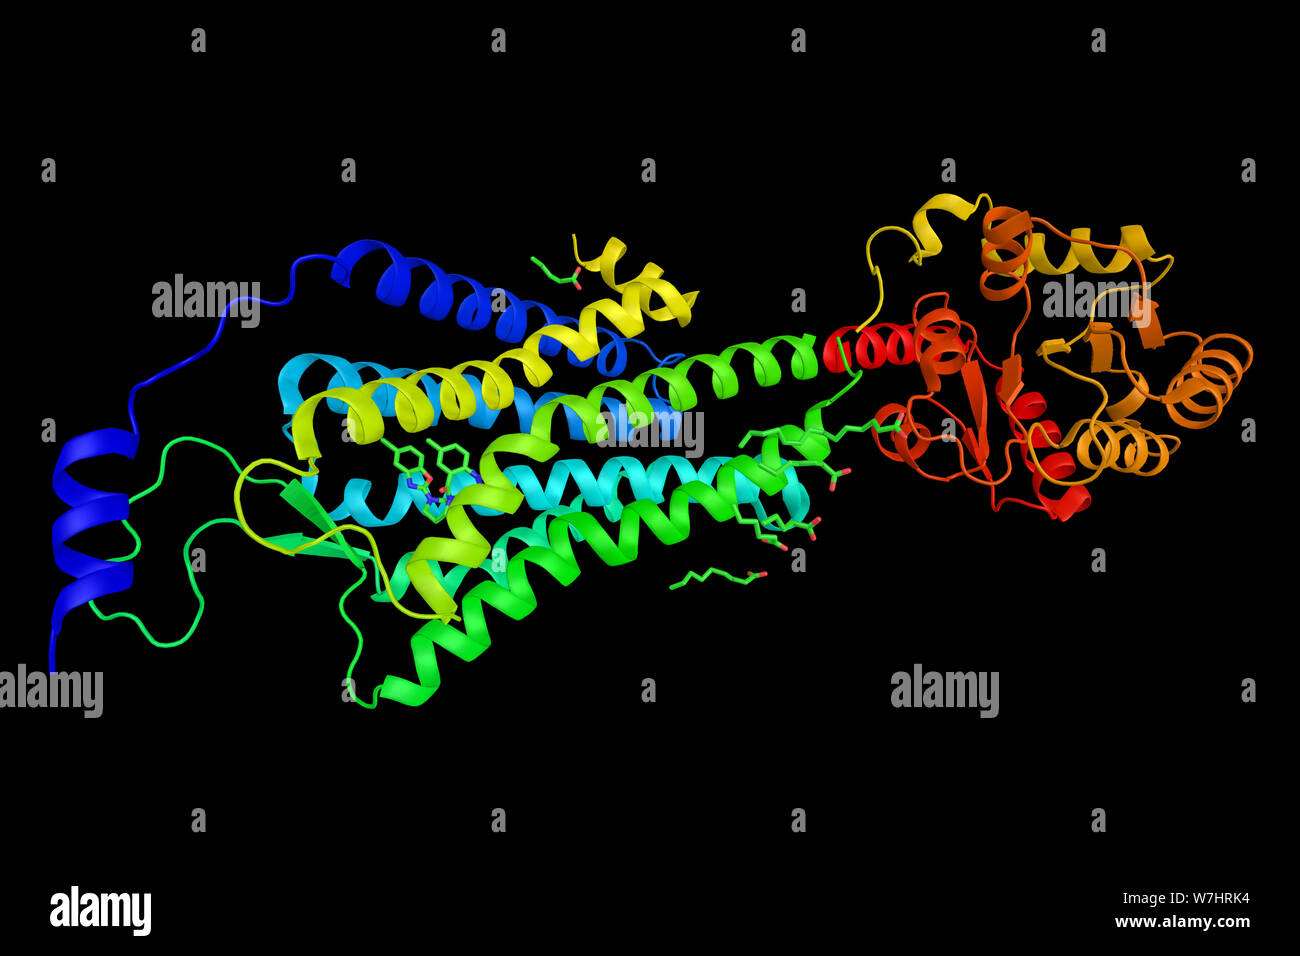 Orexin receptor type 1, a G-protein coupled receptor that is heavily expressed in projections from the lateral hypothalamus and is involved in the reg Stock Photo